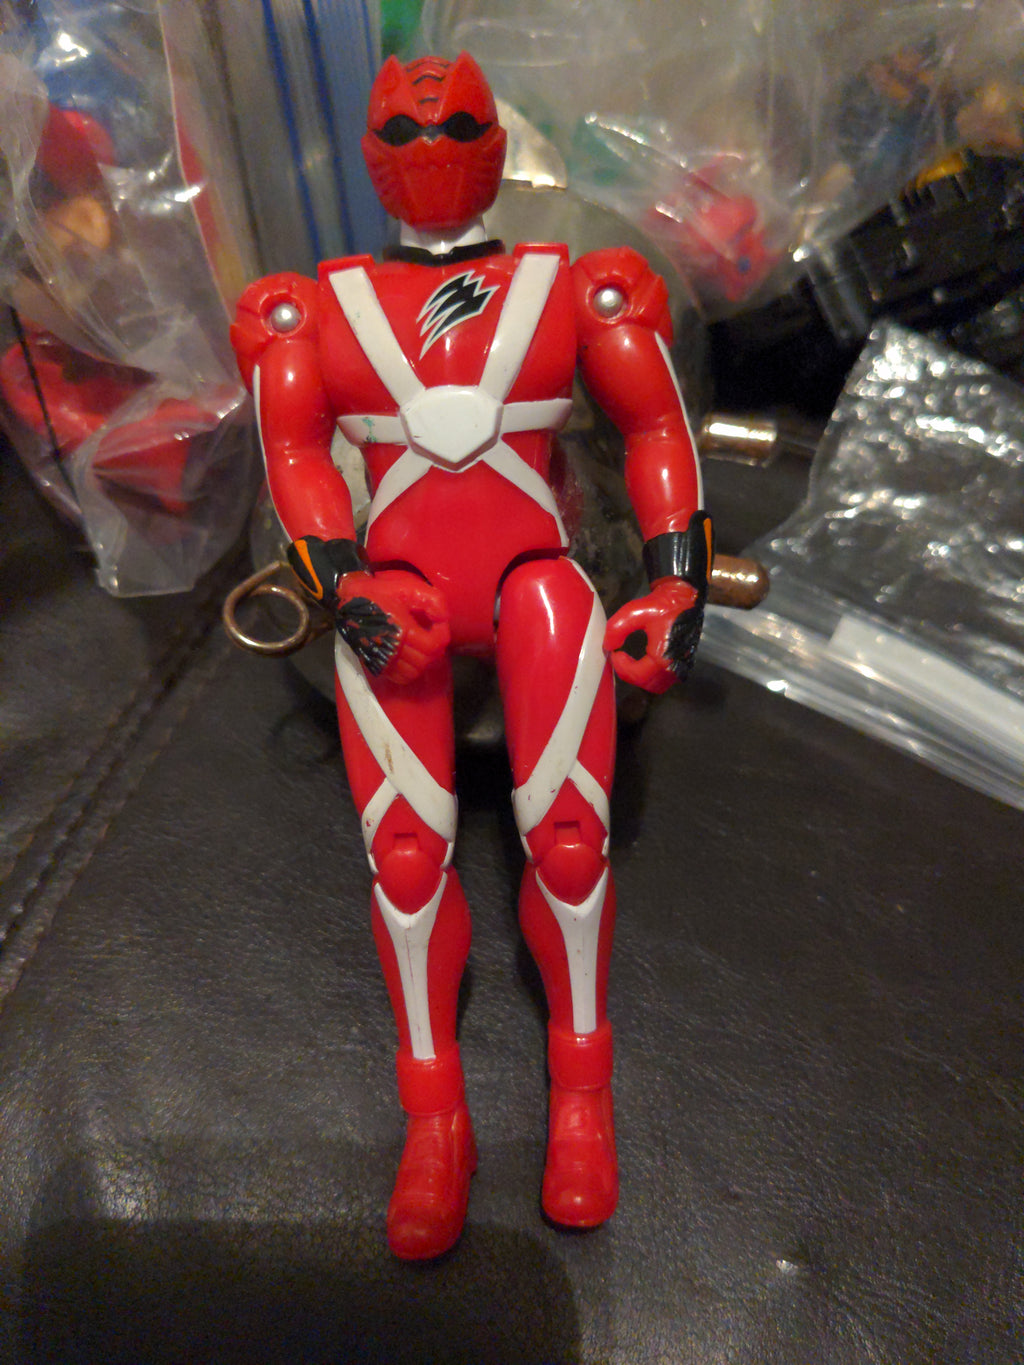 Power Rangers 5.5" Action Figure - Red Jungle Fury Ranger Toy